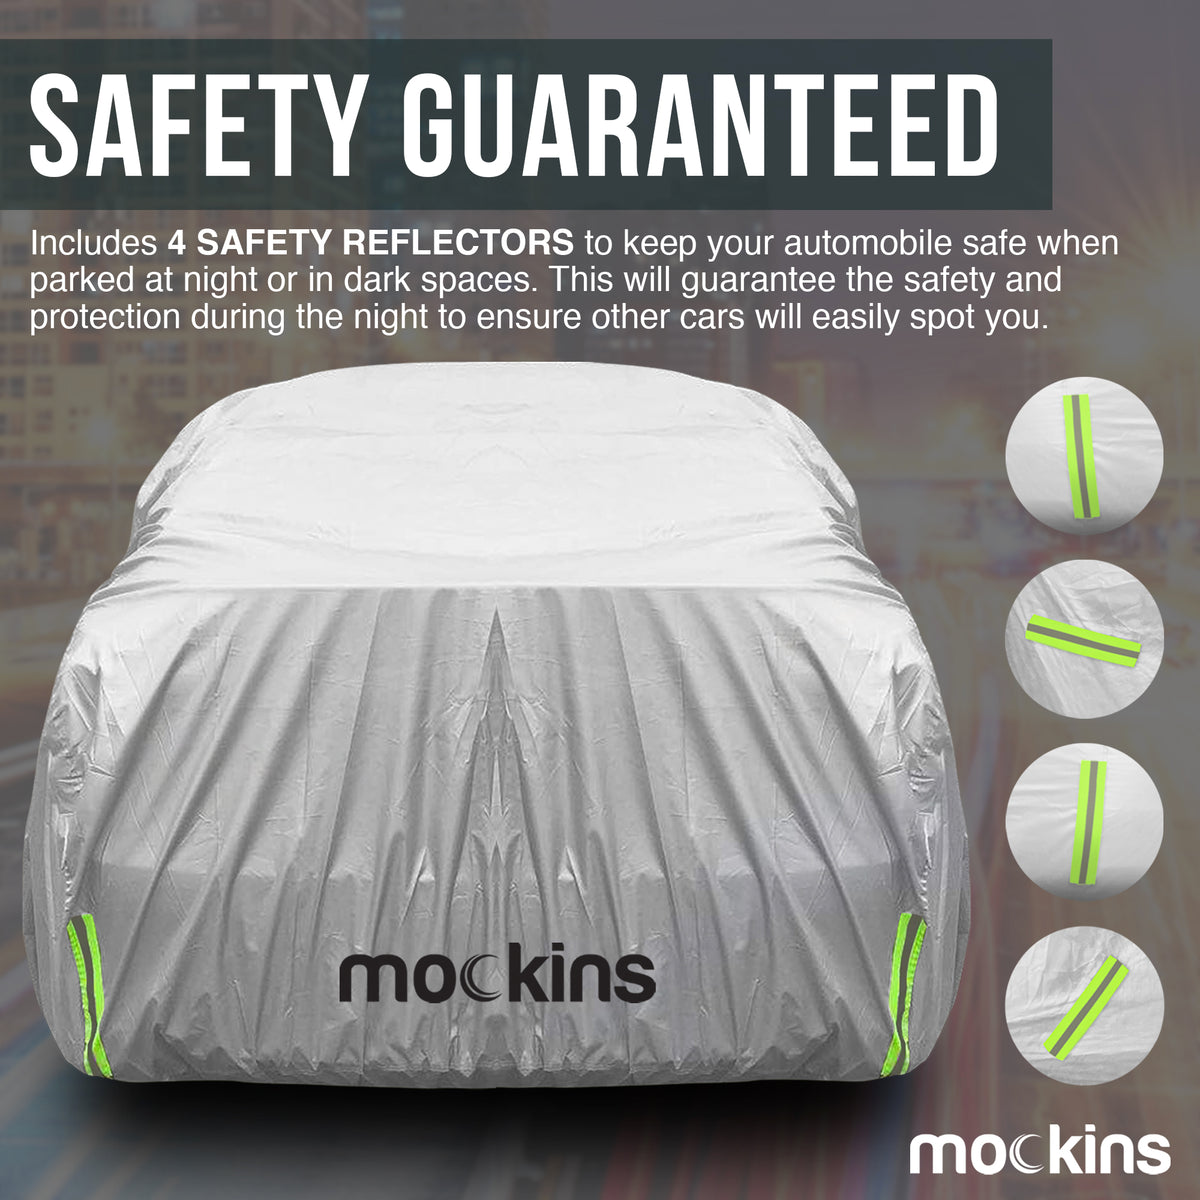 Includes 4 Safety Reflectors. This Will Guarantee The Safety And Protection During Night